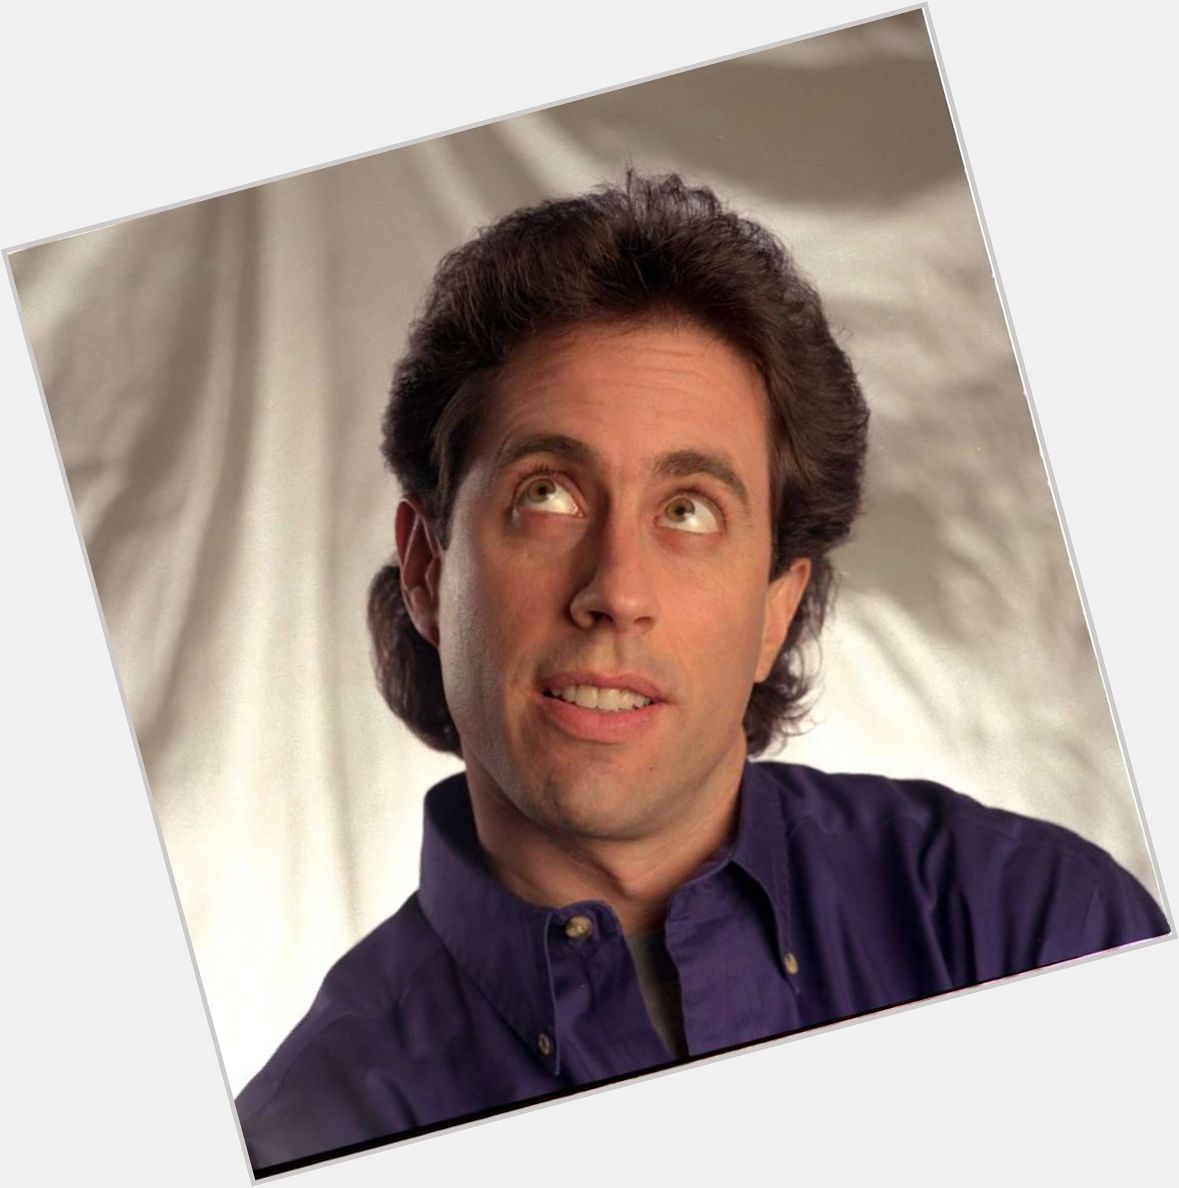 Happy Birthday to Jerry Seinfeld, who turns 61 today! 